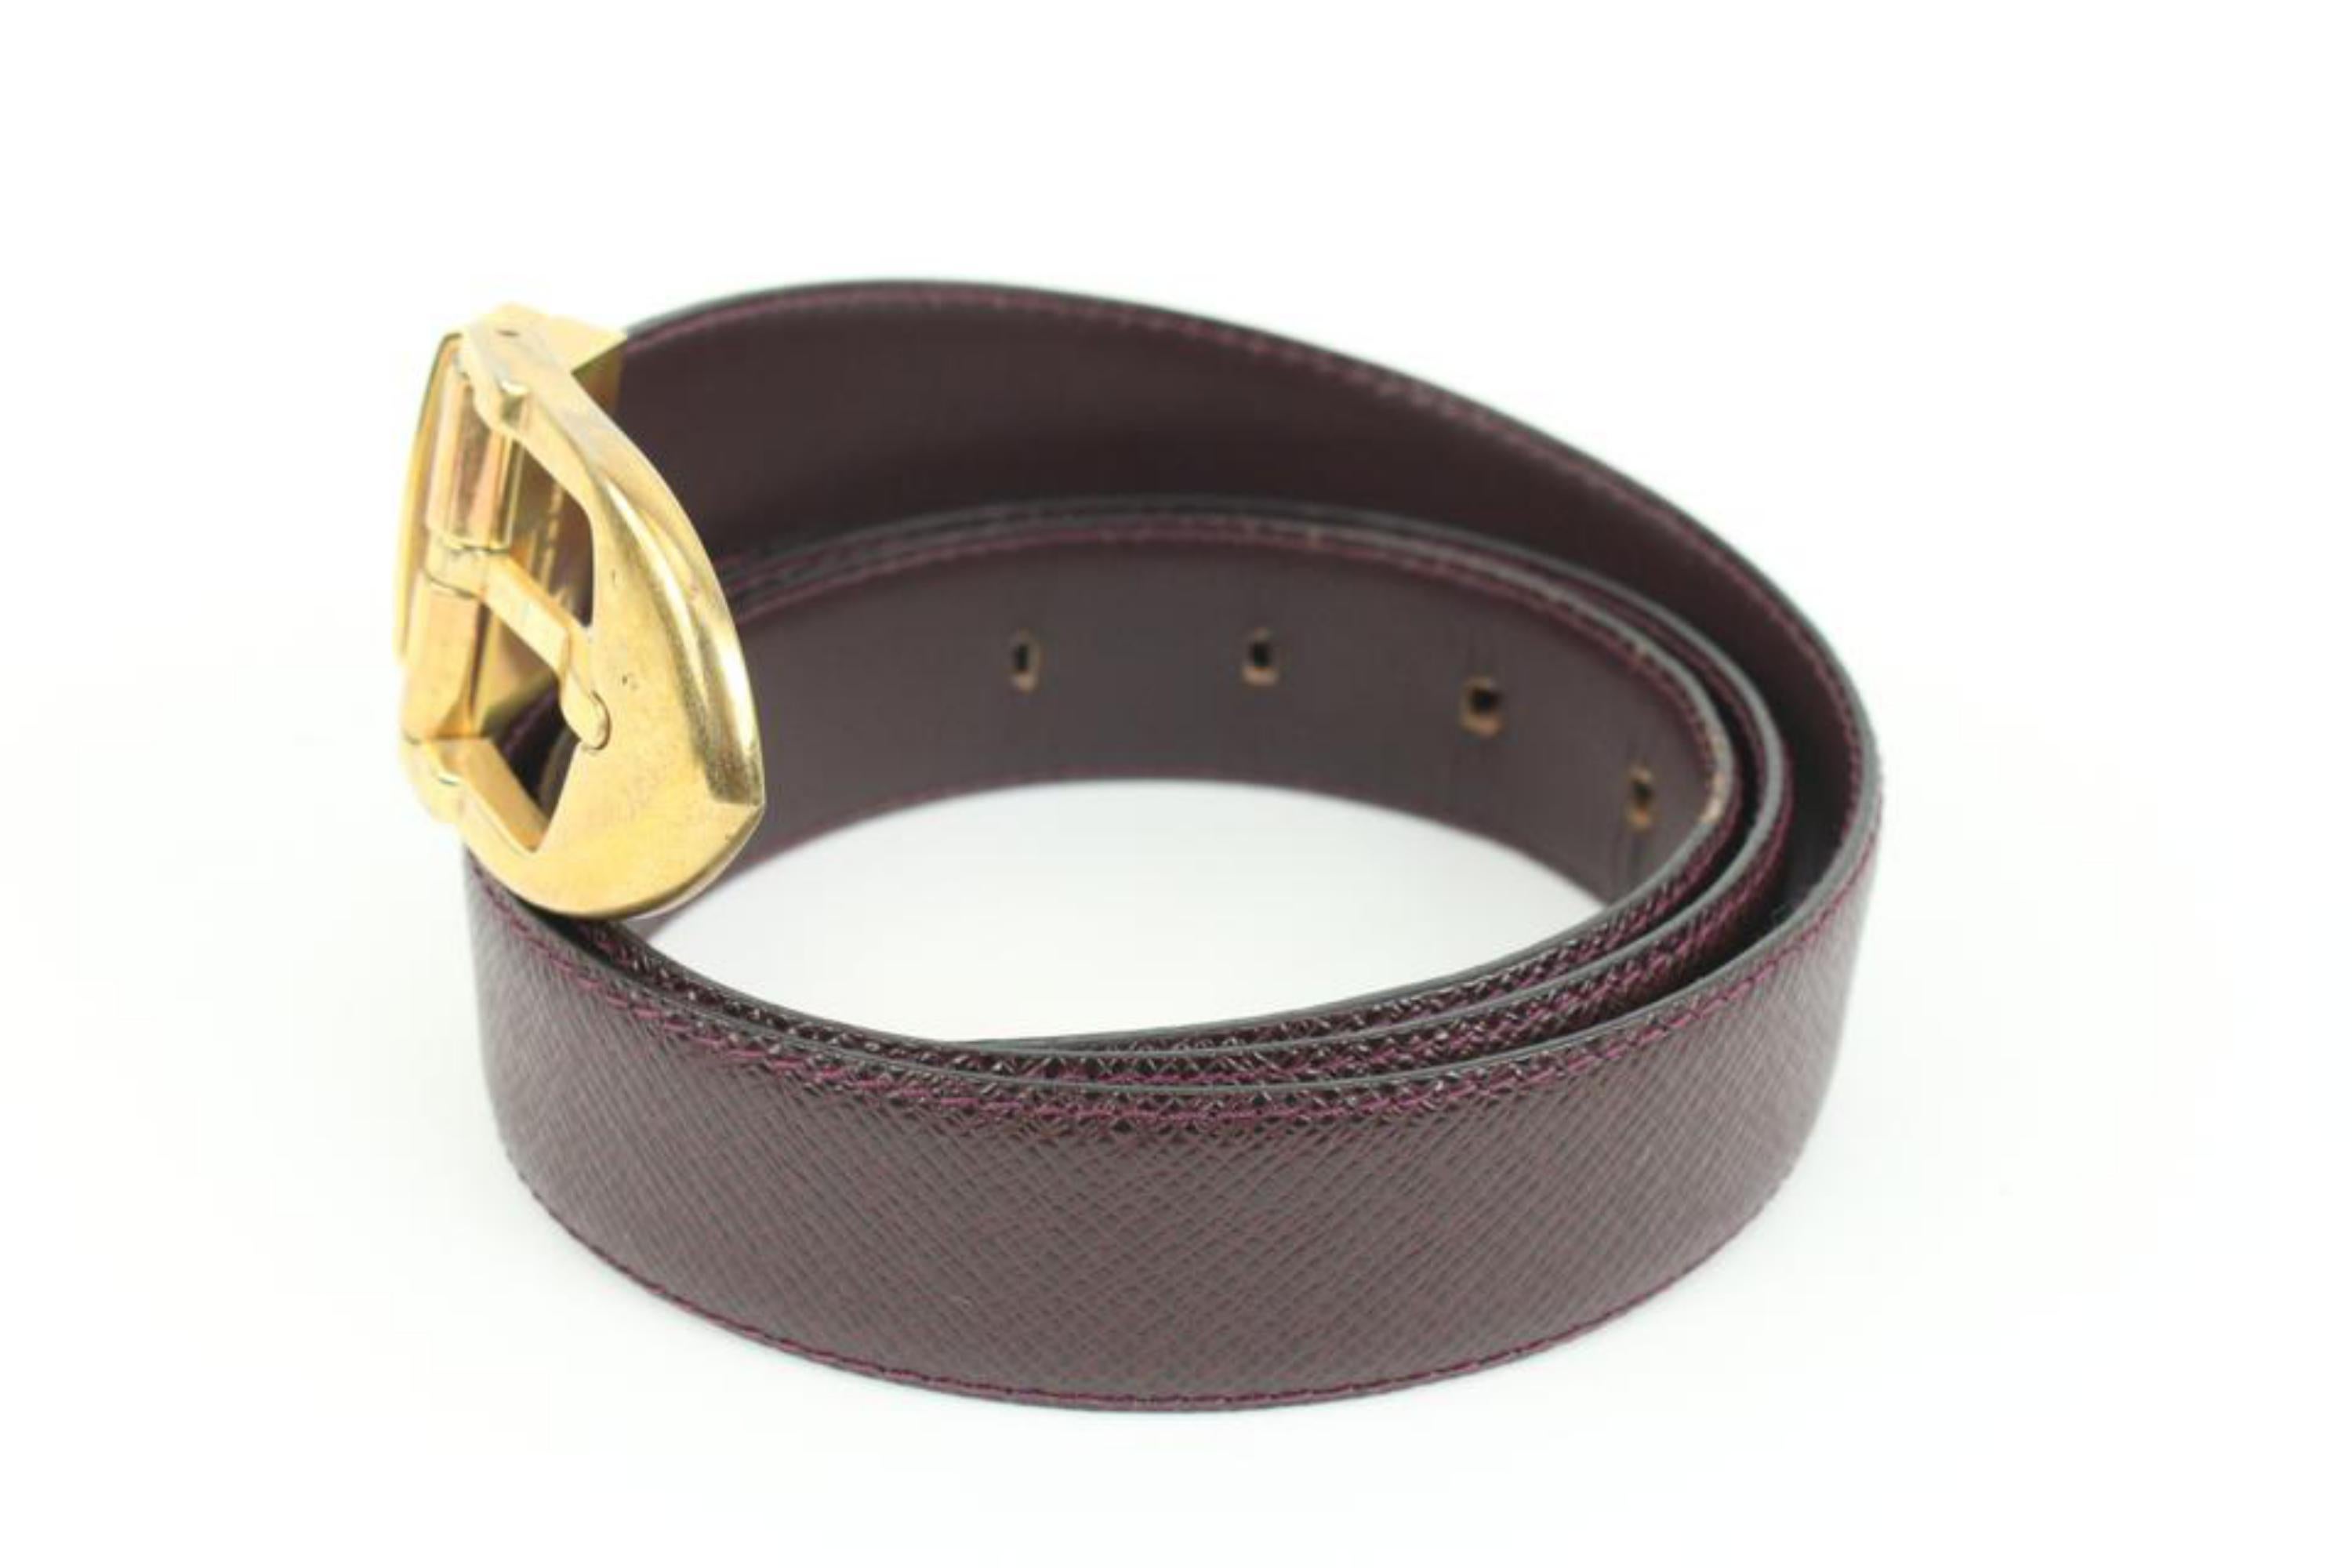 1990's Louis Vuitton Yellow EPI Leather Ceinture with Gold Buckle Belt